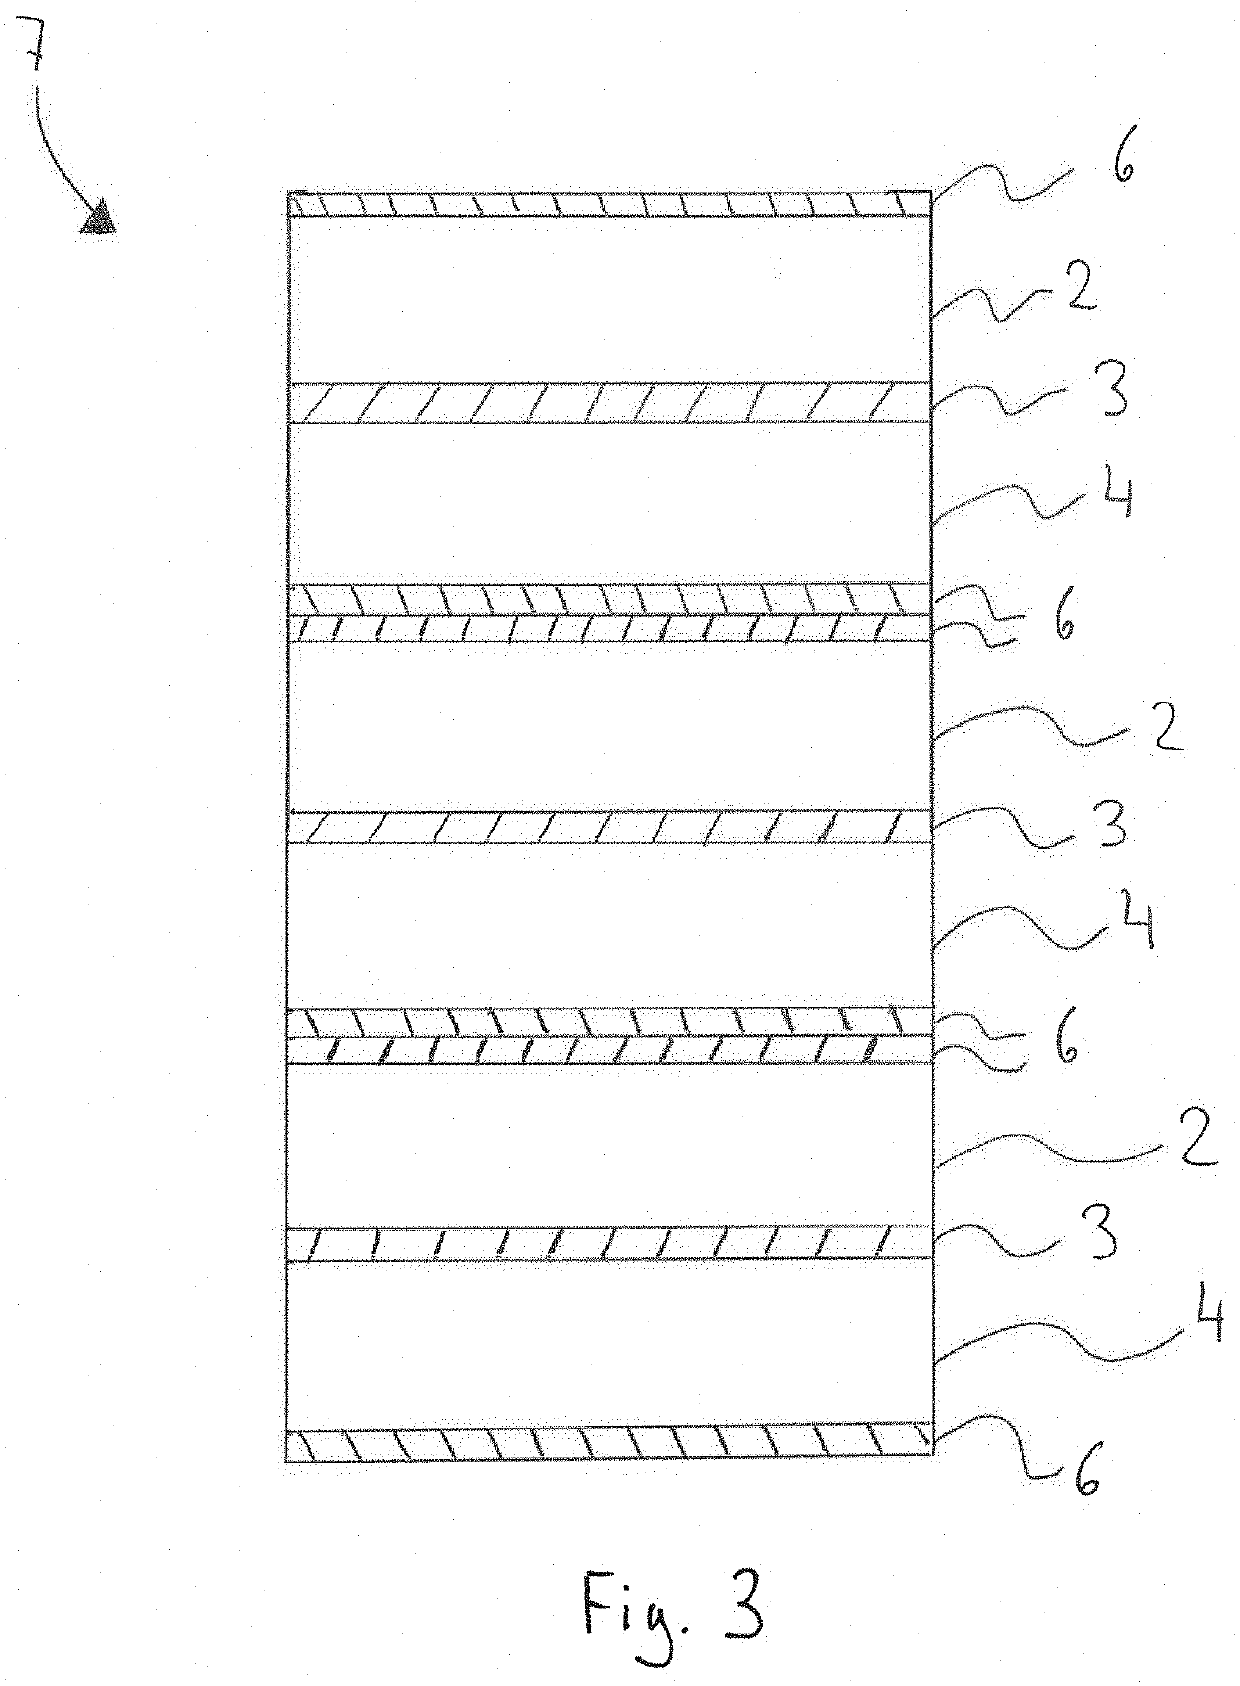 Composite Material for a Stator Stack and Rotor Stack